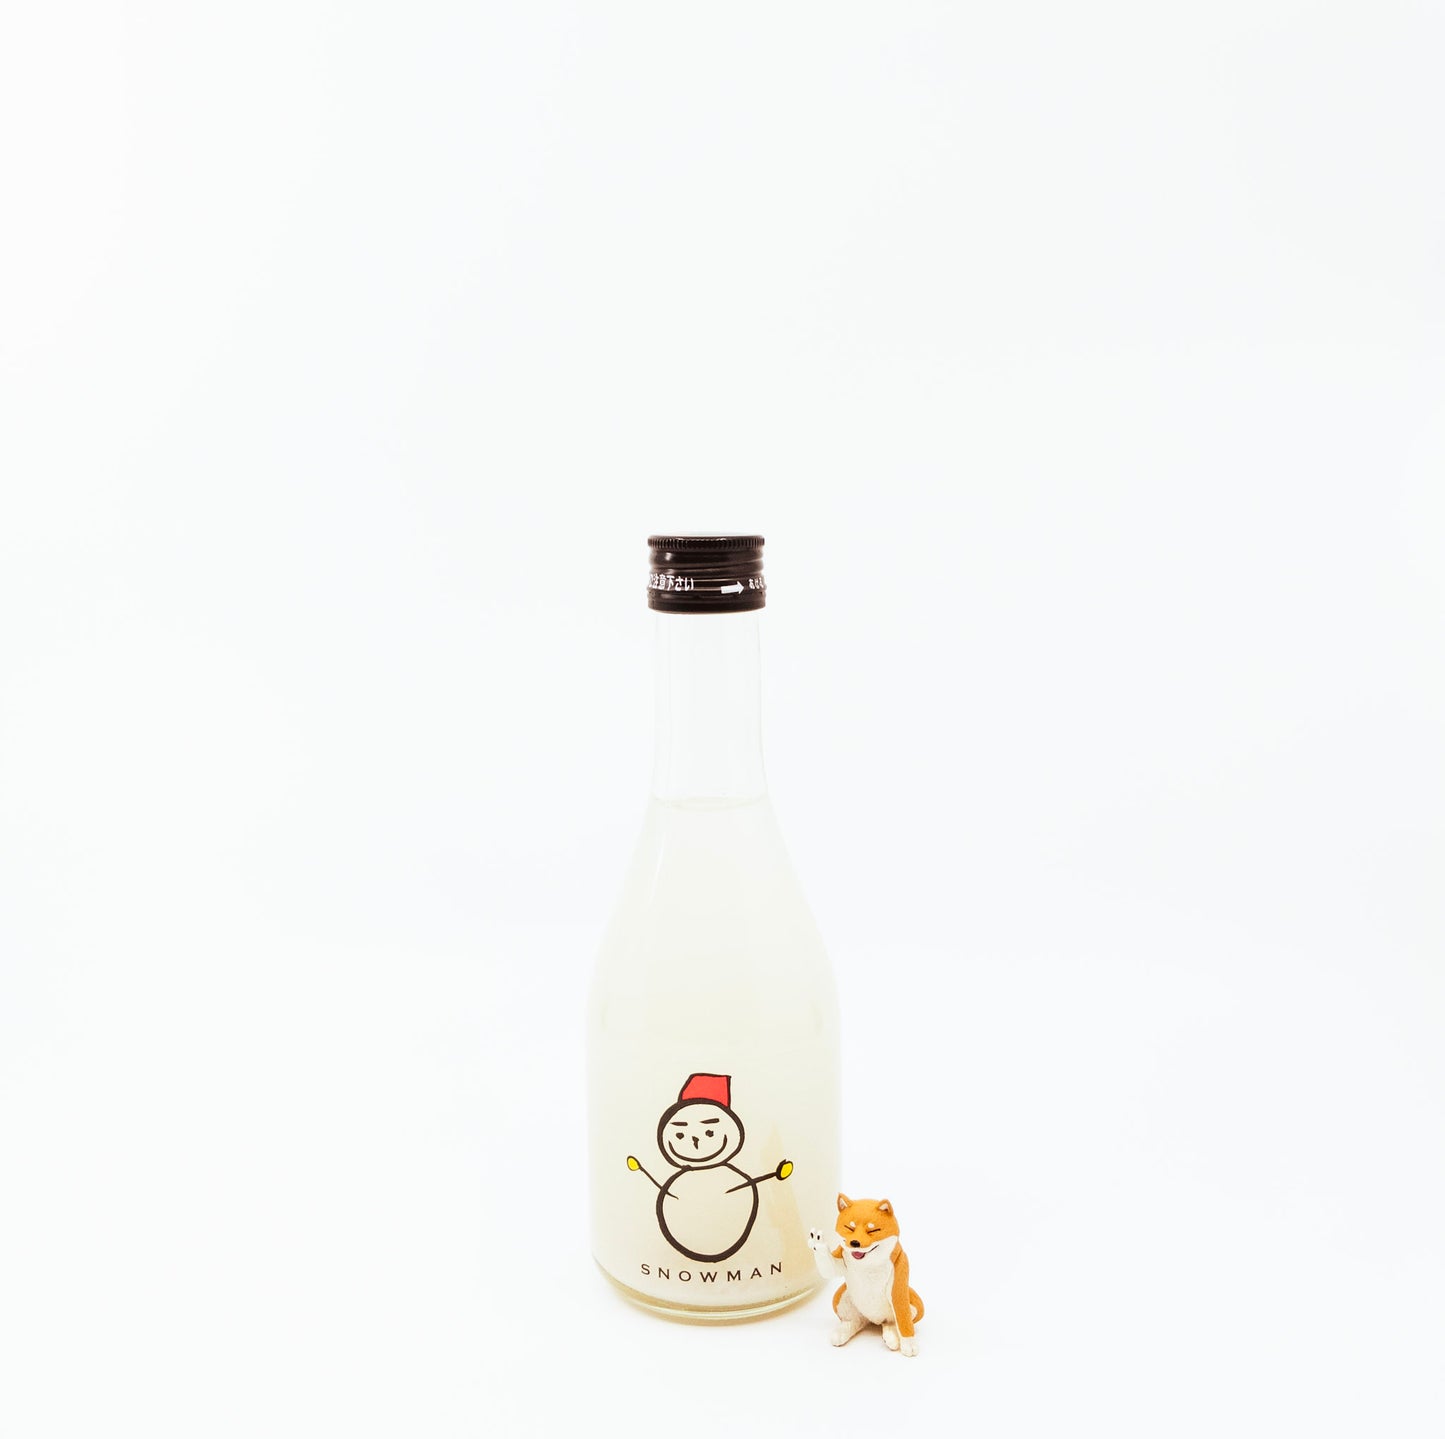 small bottle of snowman next to dog figurine